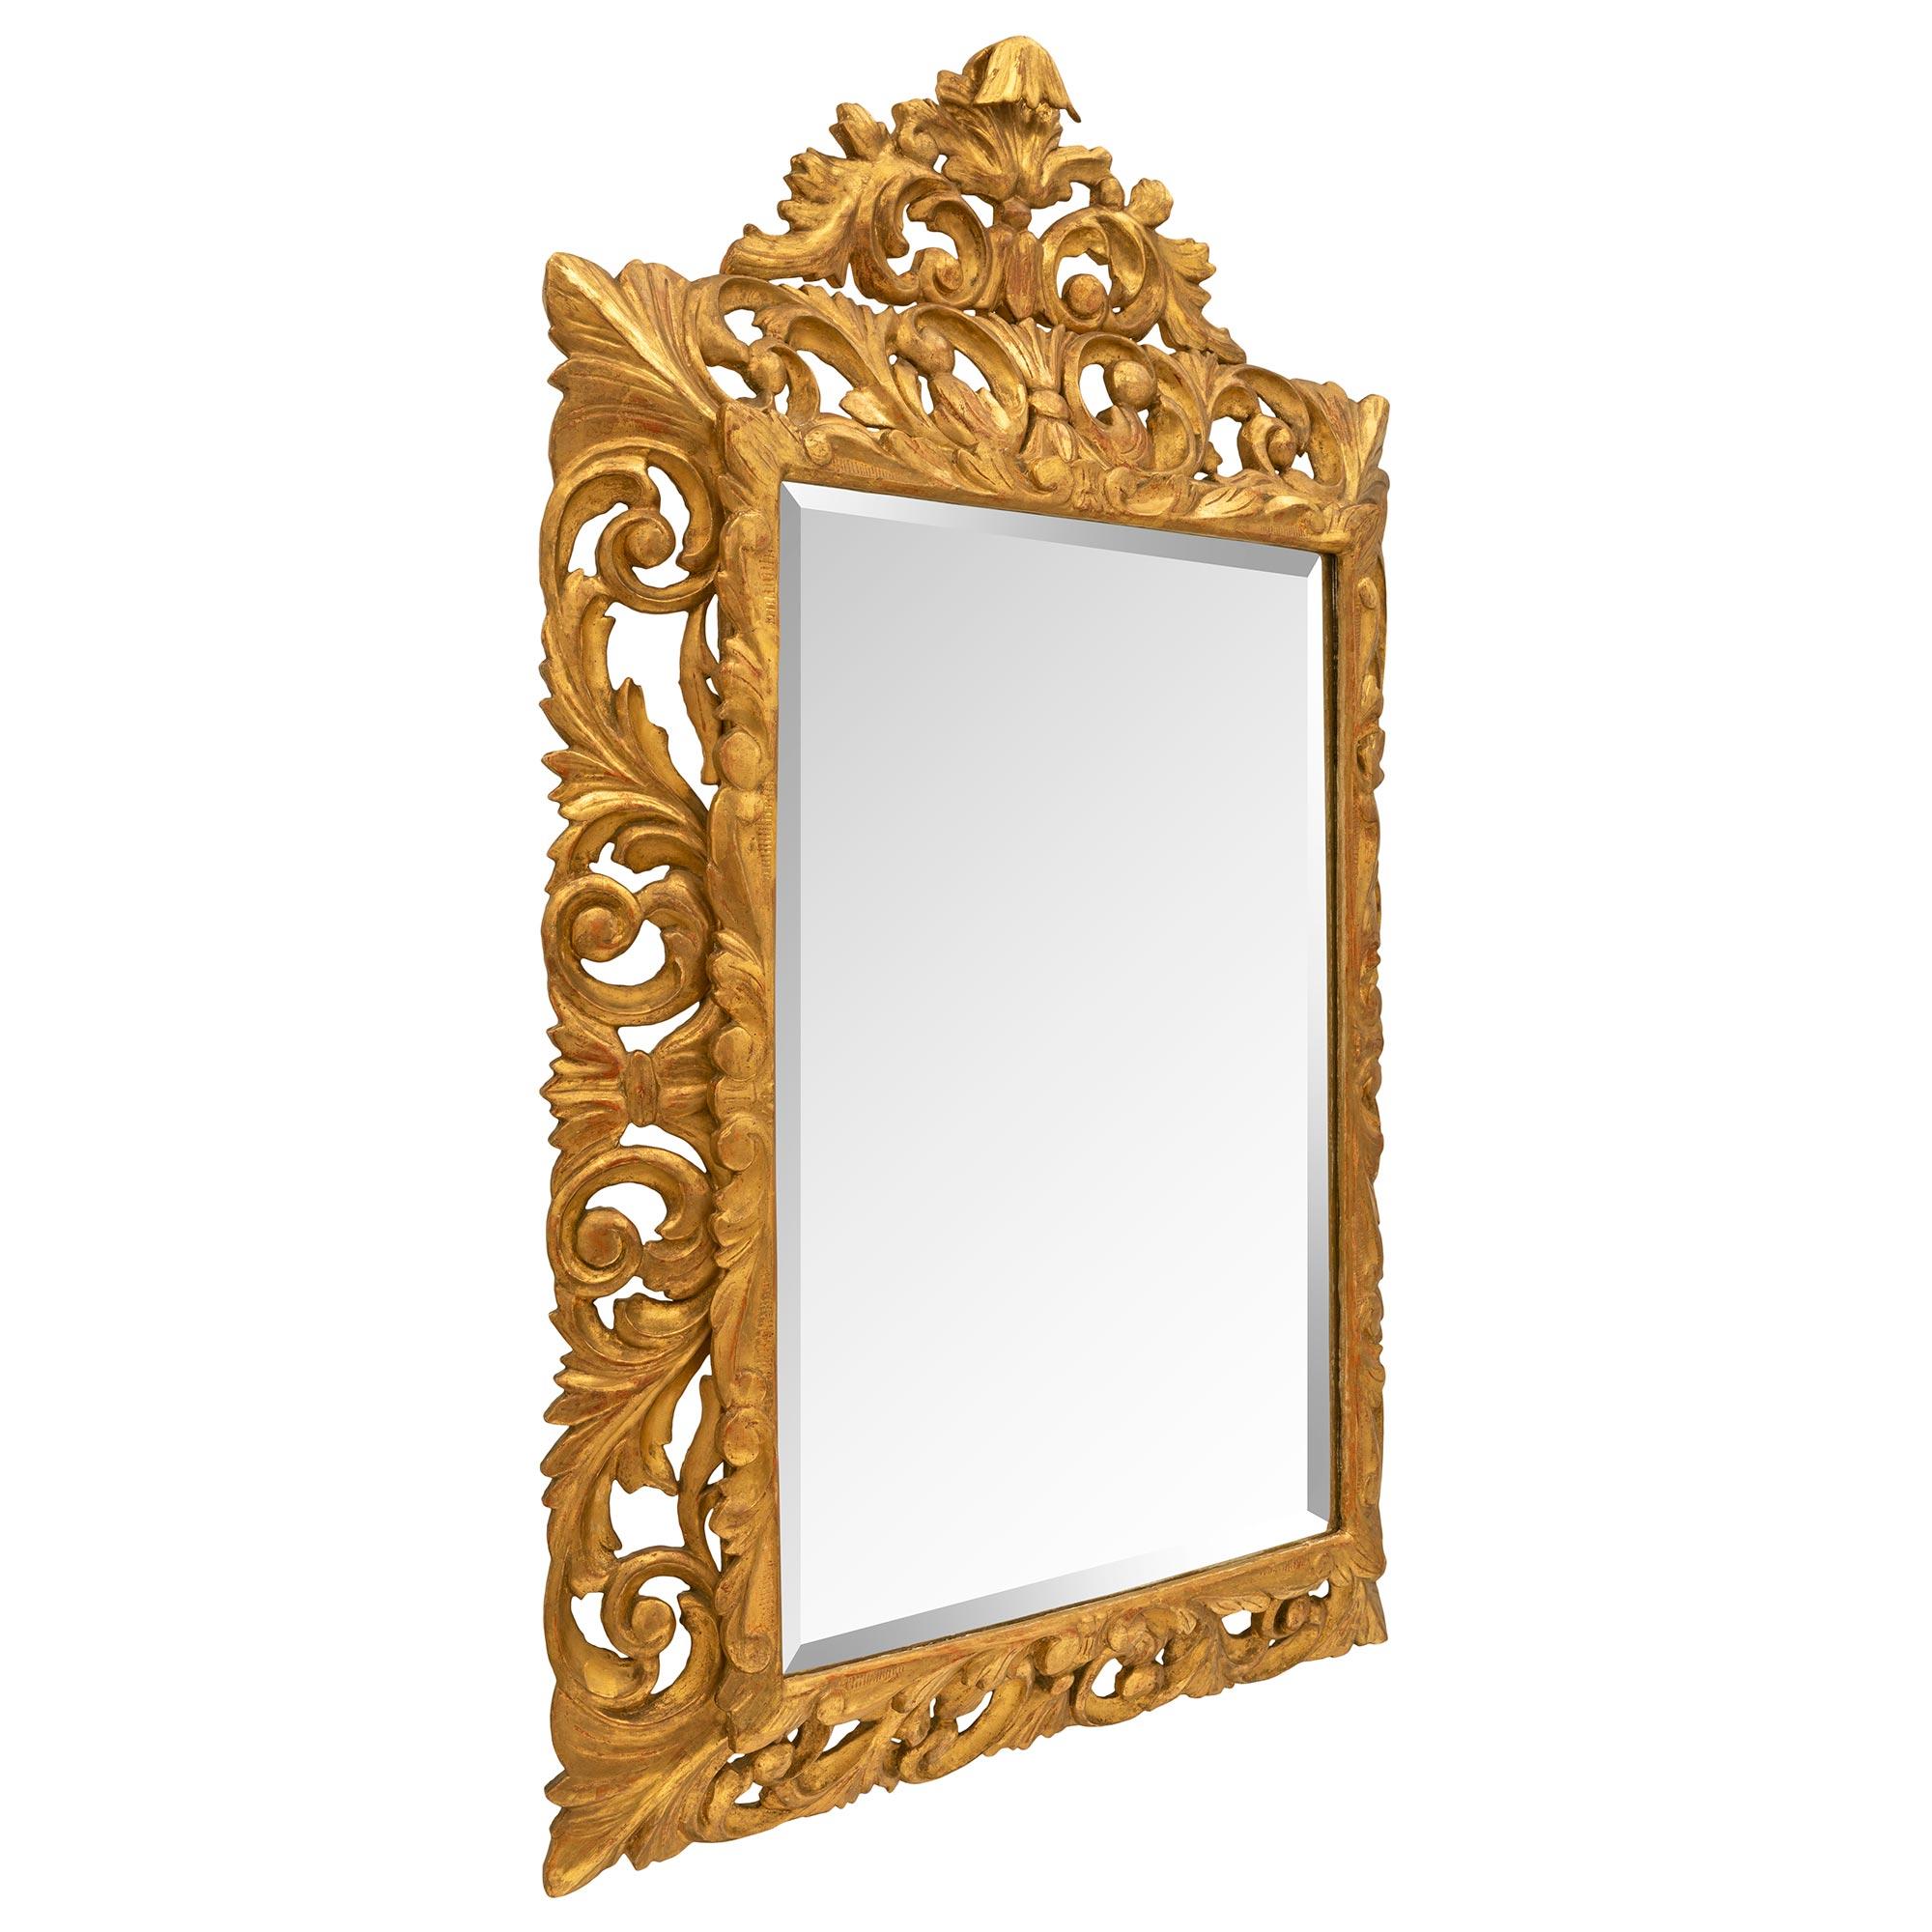 A handsome Italian 19th century Baroque st. giltwood mirror. The mirror retains its original beveled mirror plate set within a fine mottled border with etched designs. The pierced frame displays an impressive array of wonderfully executed